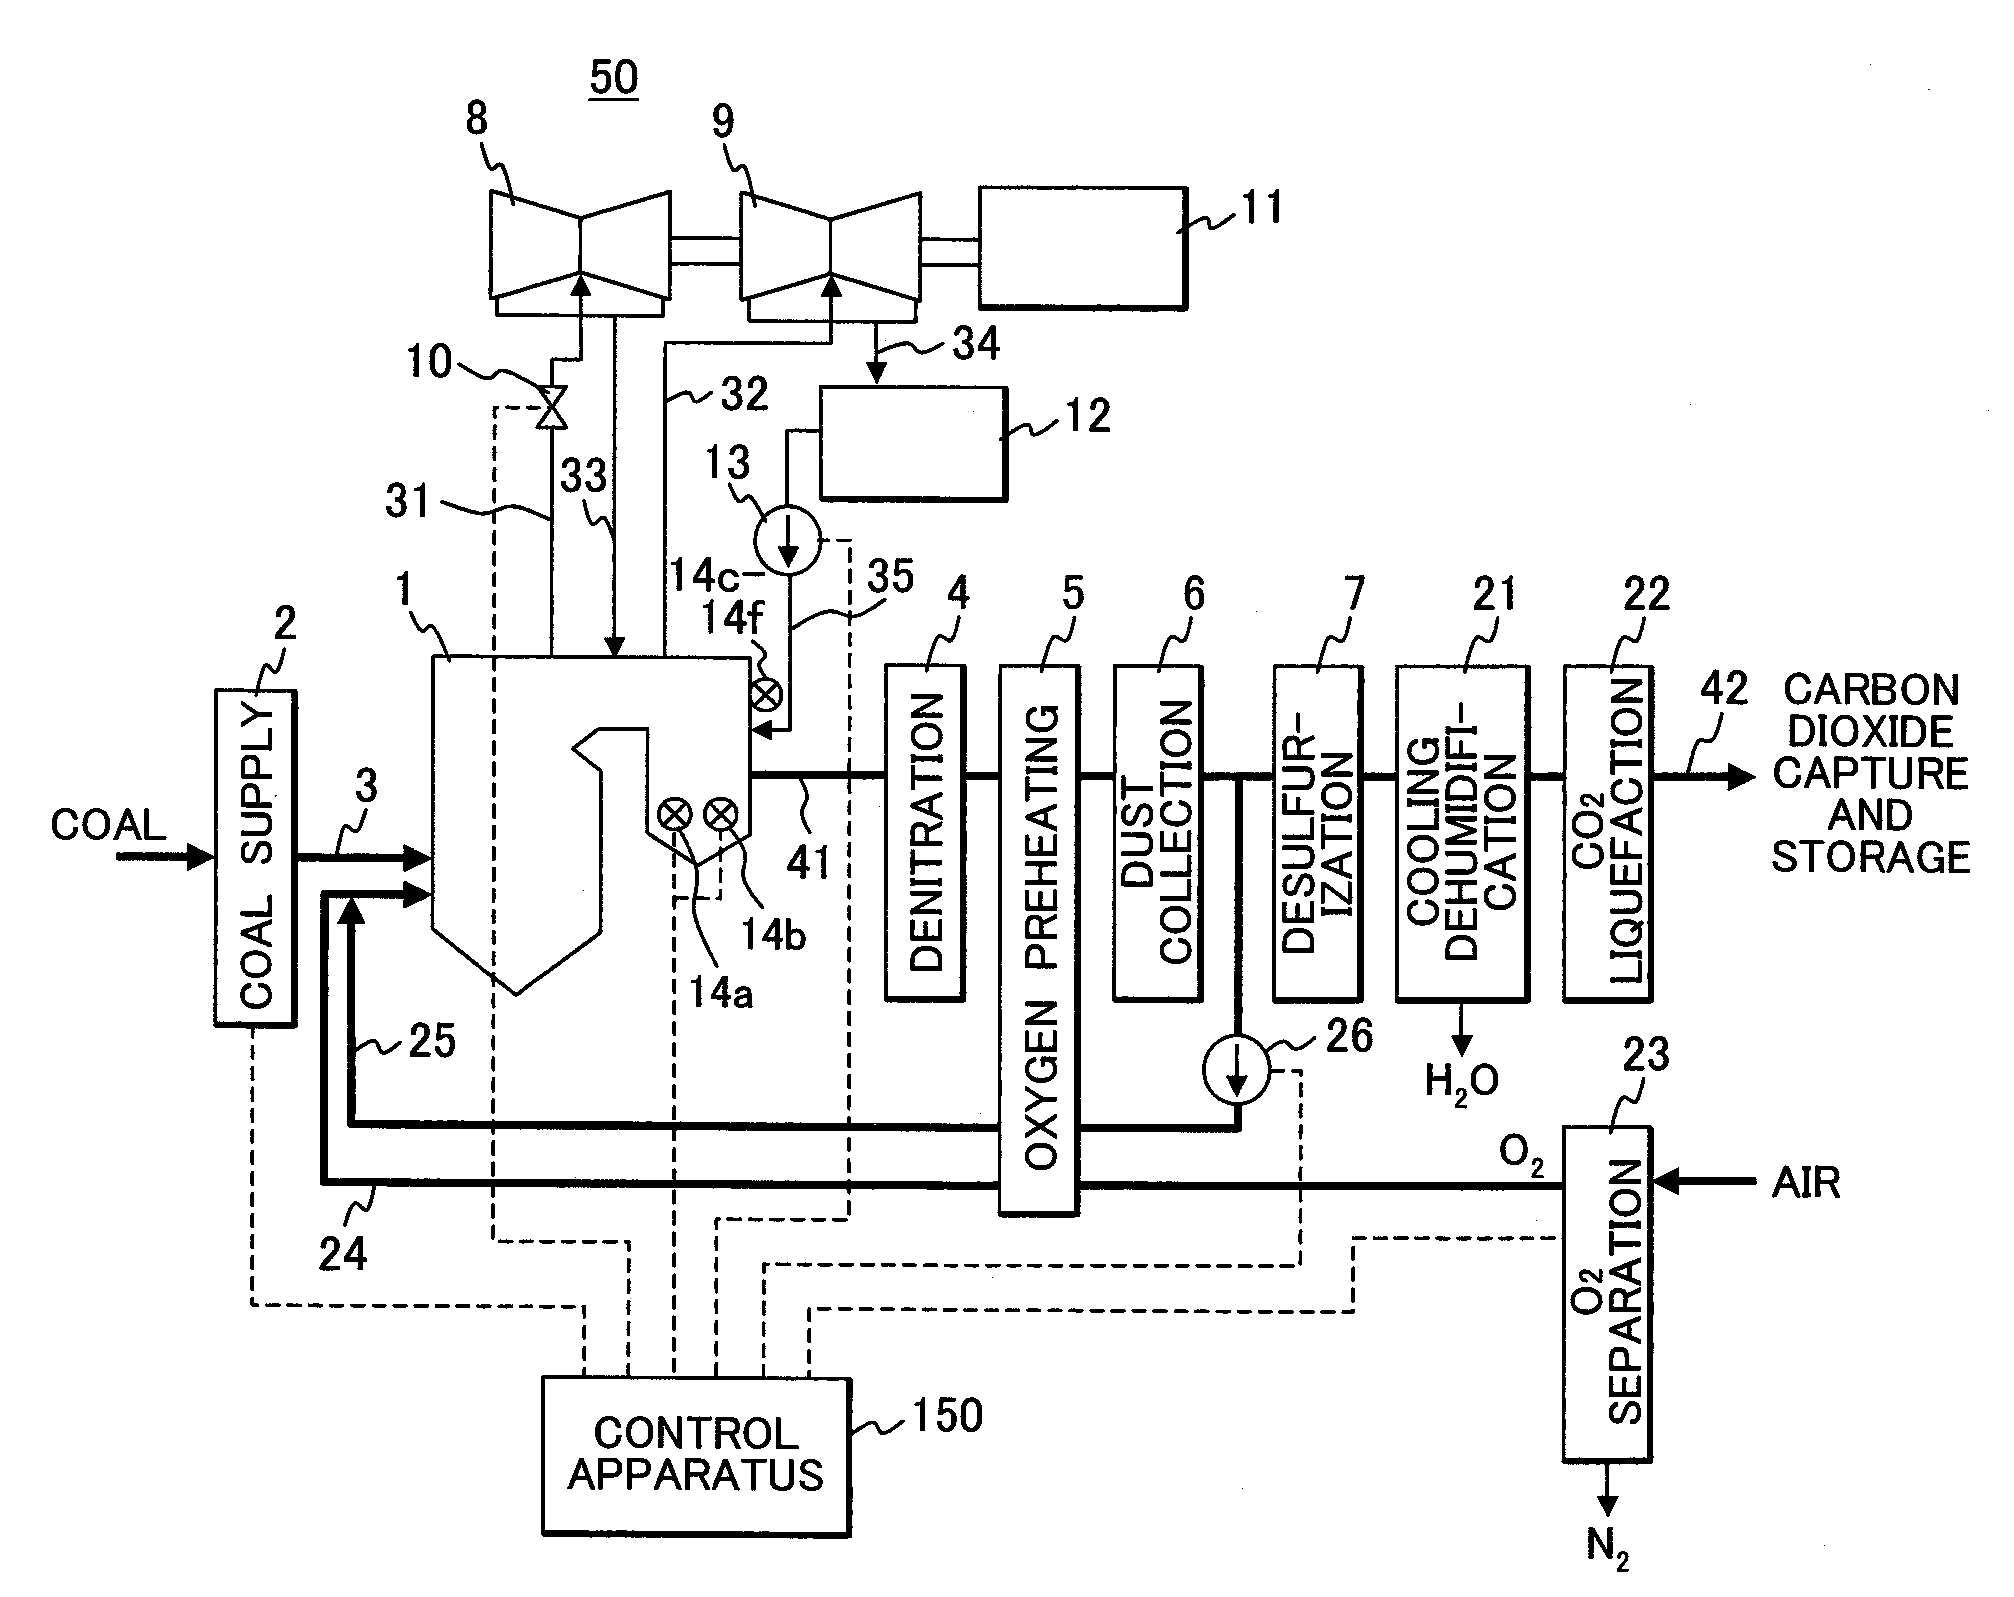 Oxyfuel Boiler and a Method of Controlling the Same